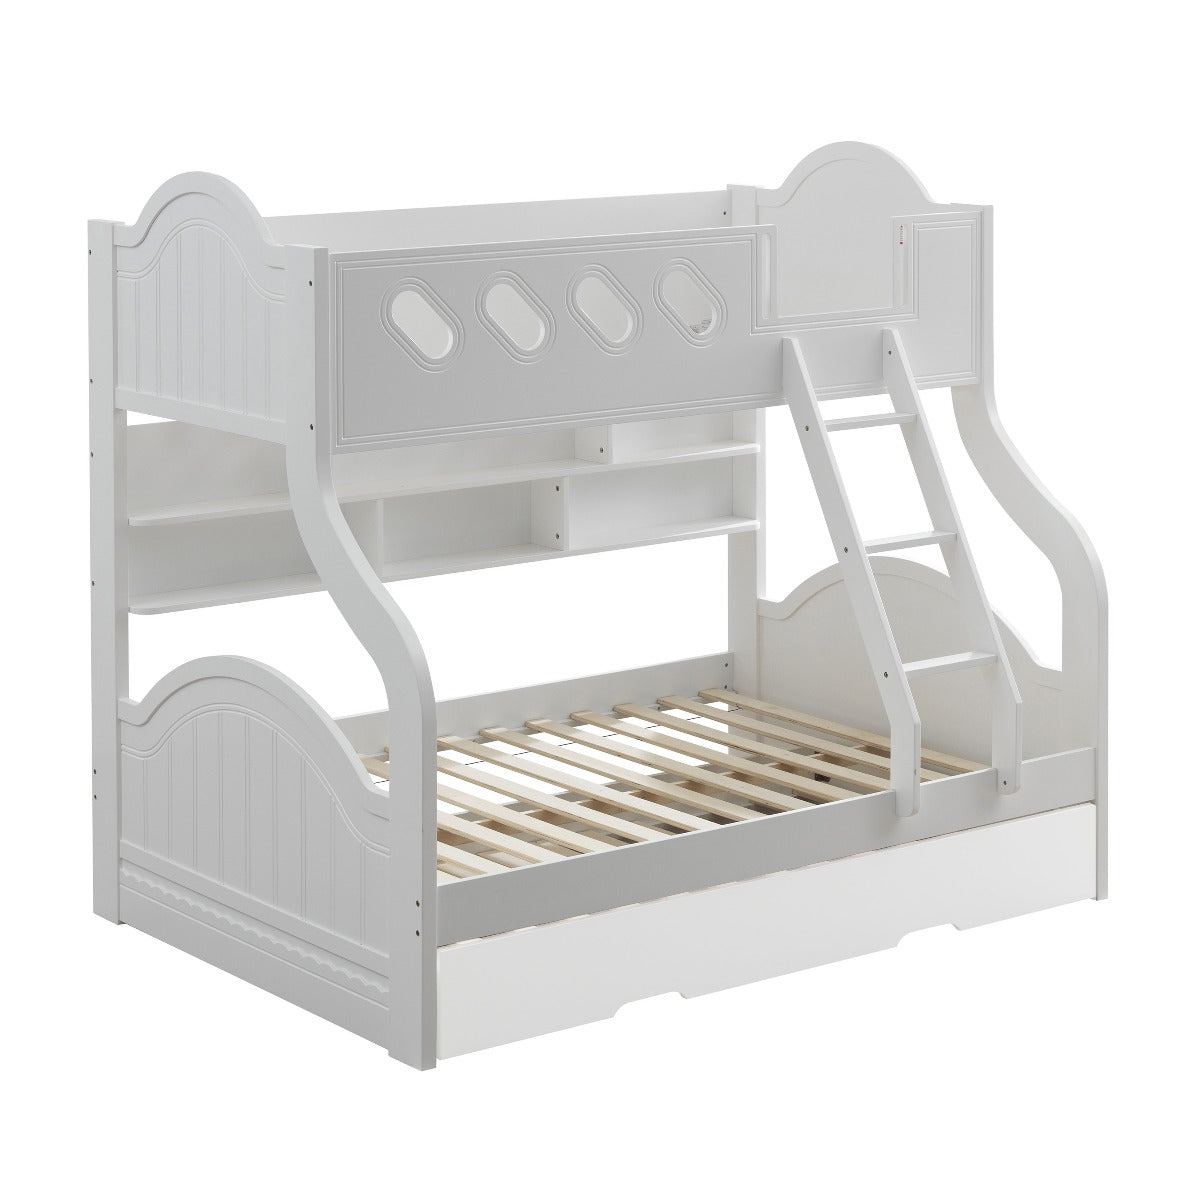 ACME Furniture Beds - ACME Grover Twin/Full Bunk Bed w/Storage, White